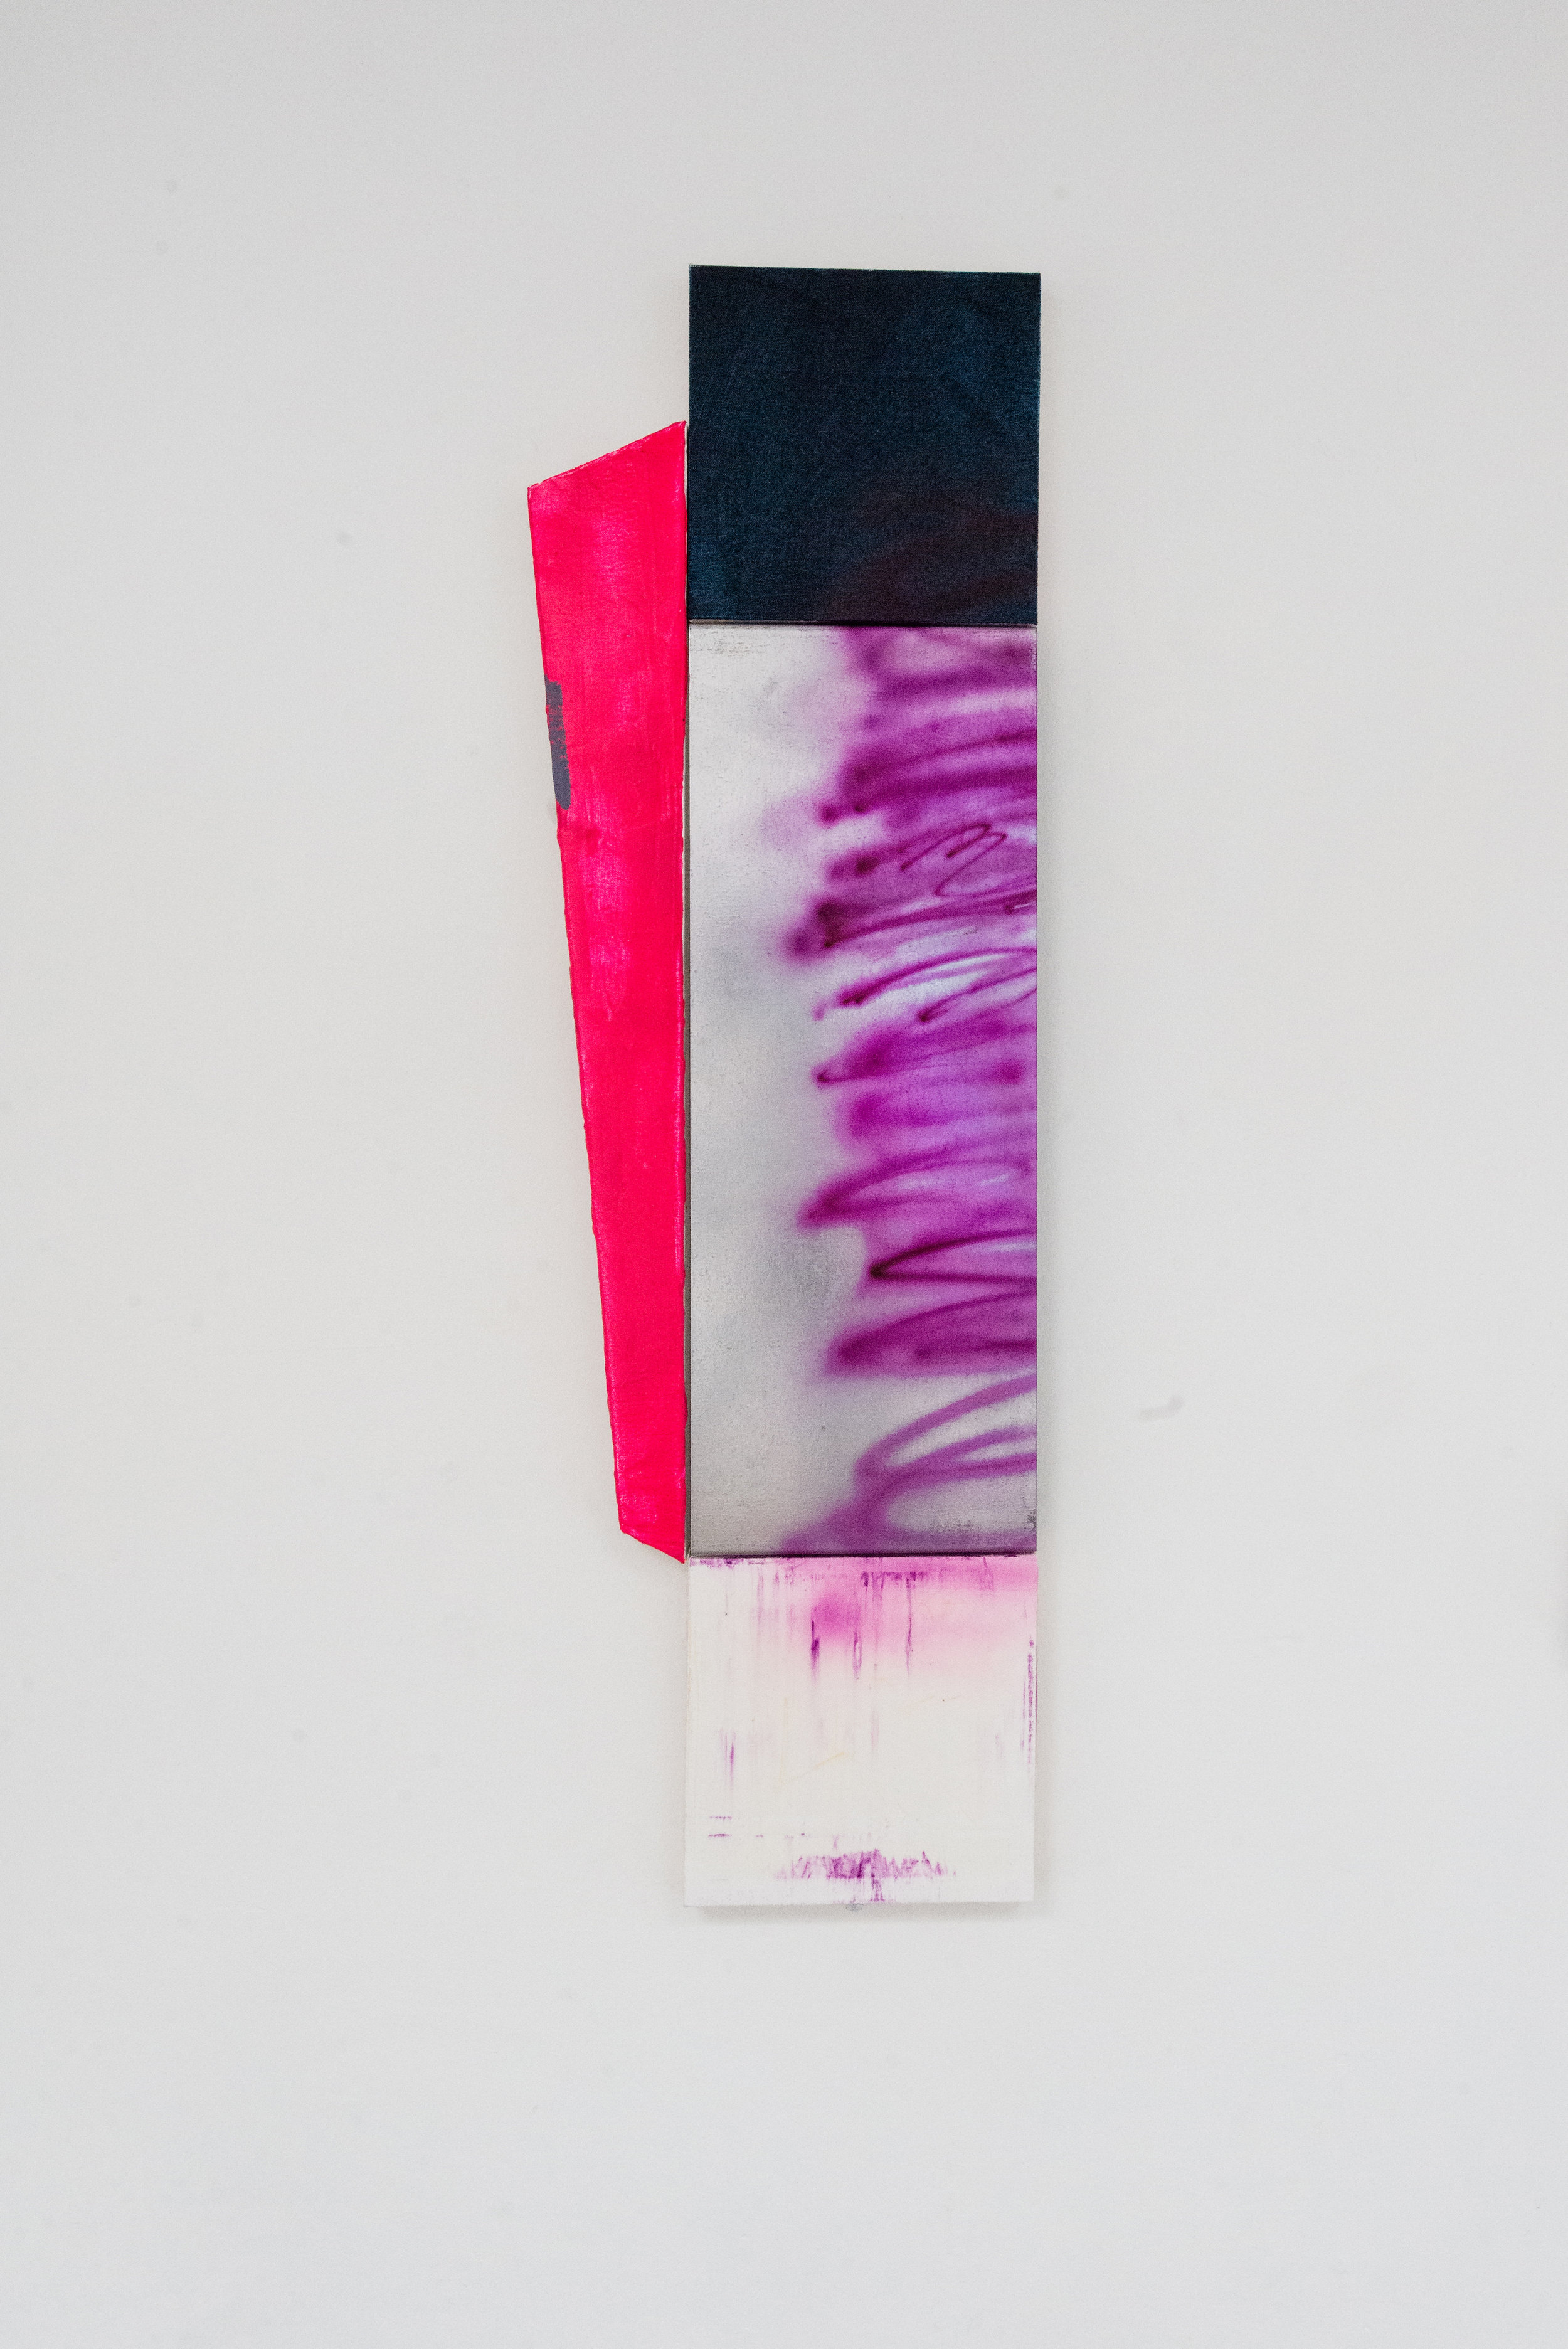  Lana Williams,  Role Reversal , 2018. Acrylic, smoke pigment, and oil on canvas, steel. 33 3/8 x 13 1/4 inches     